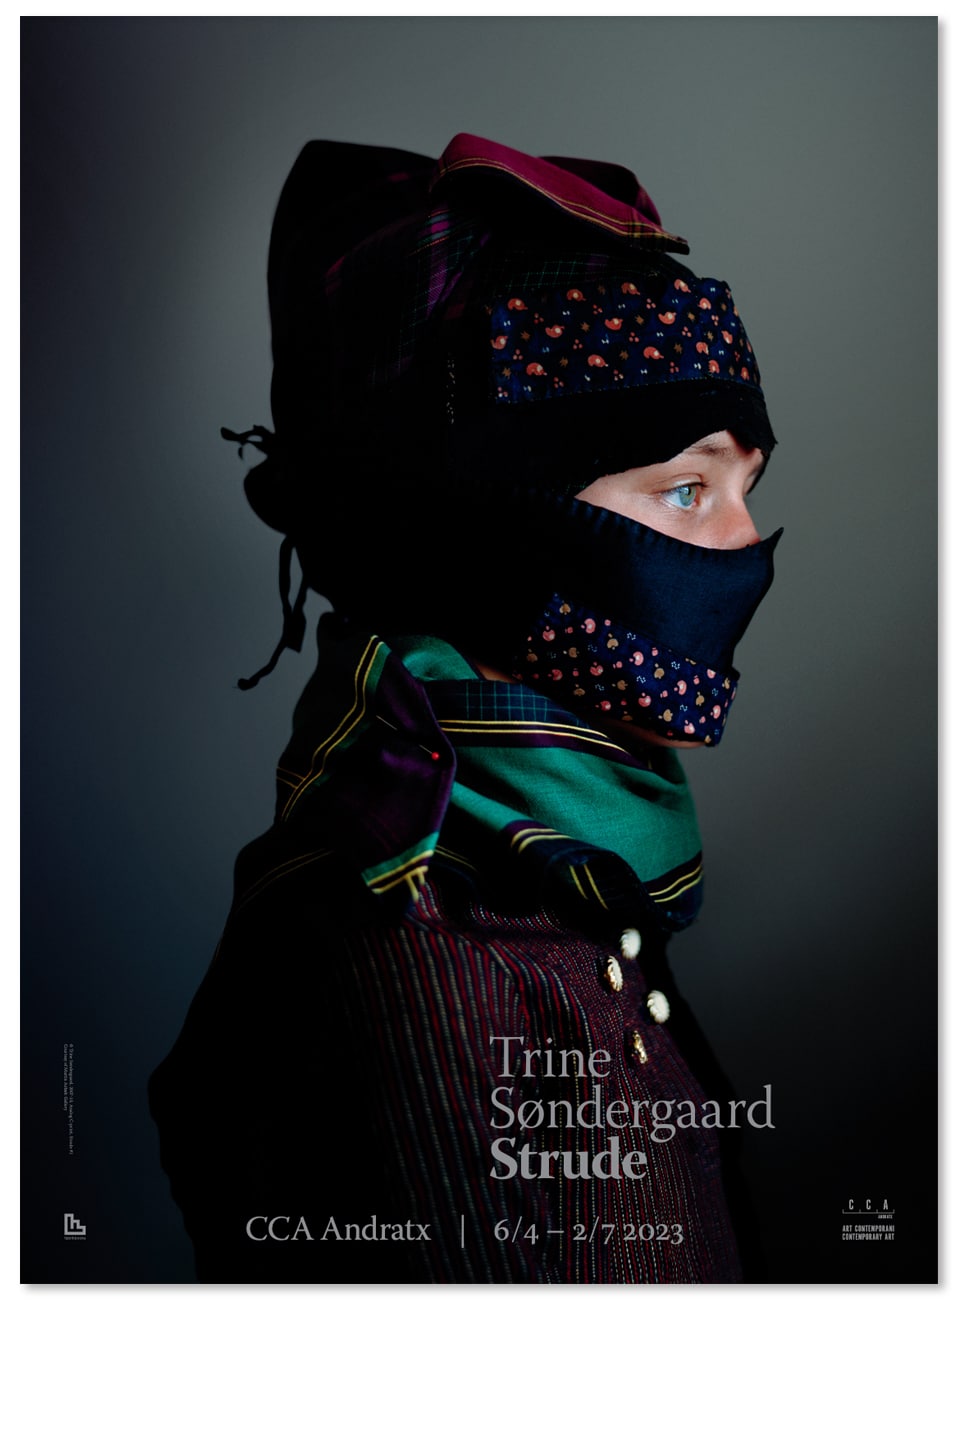 A1 sized poster with an image from Trine Sondergaard's Strude series